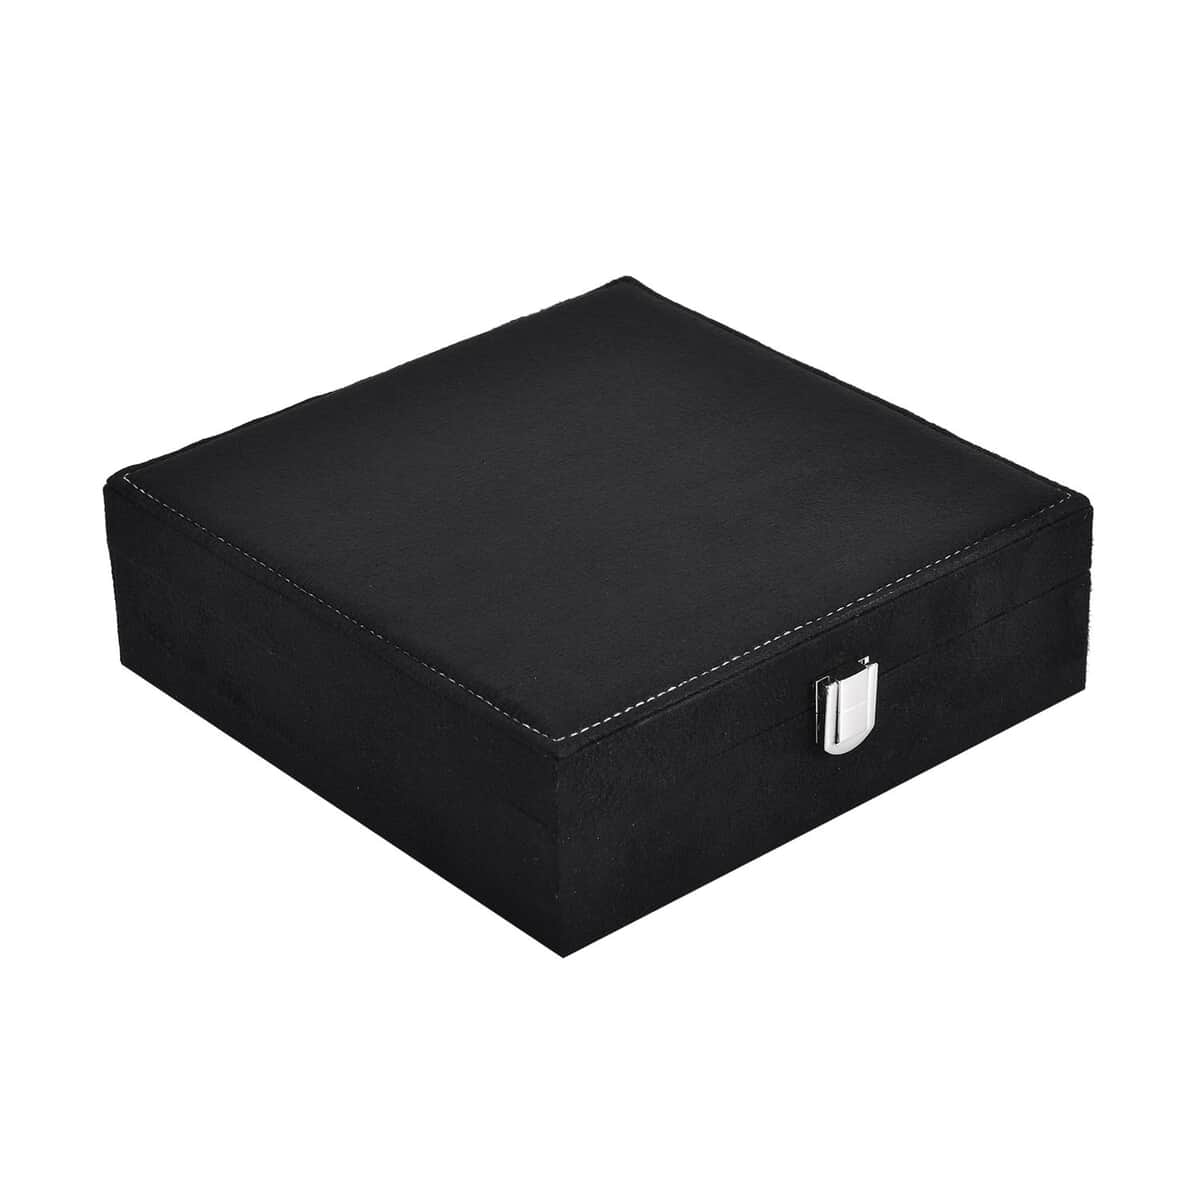 Black Velvet & MDF Jewelry Box with Latch Clasp 7.9"x7.9"x2.6") (11 Ring Slot, 6 Hooks for Necklace, Pocket) image number 1